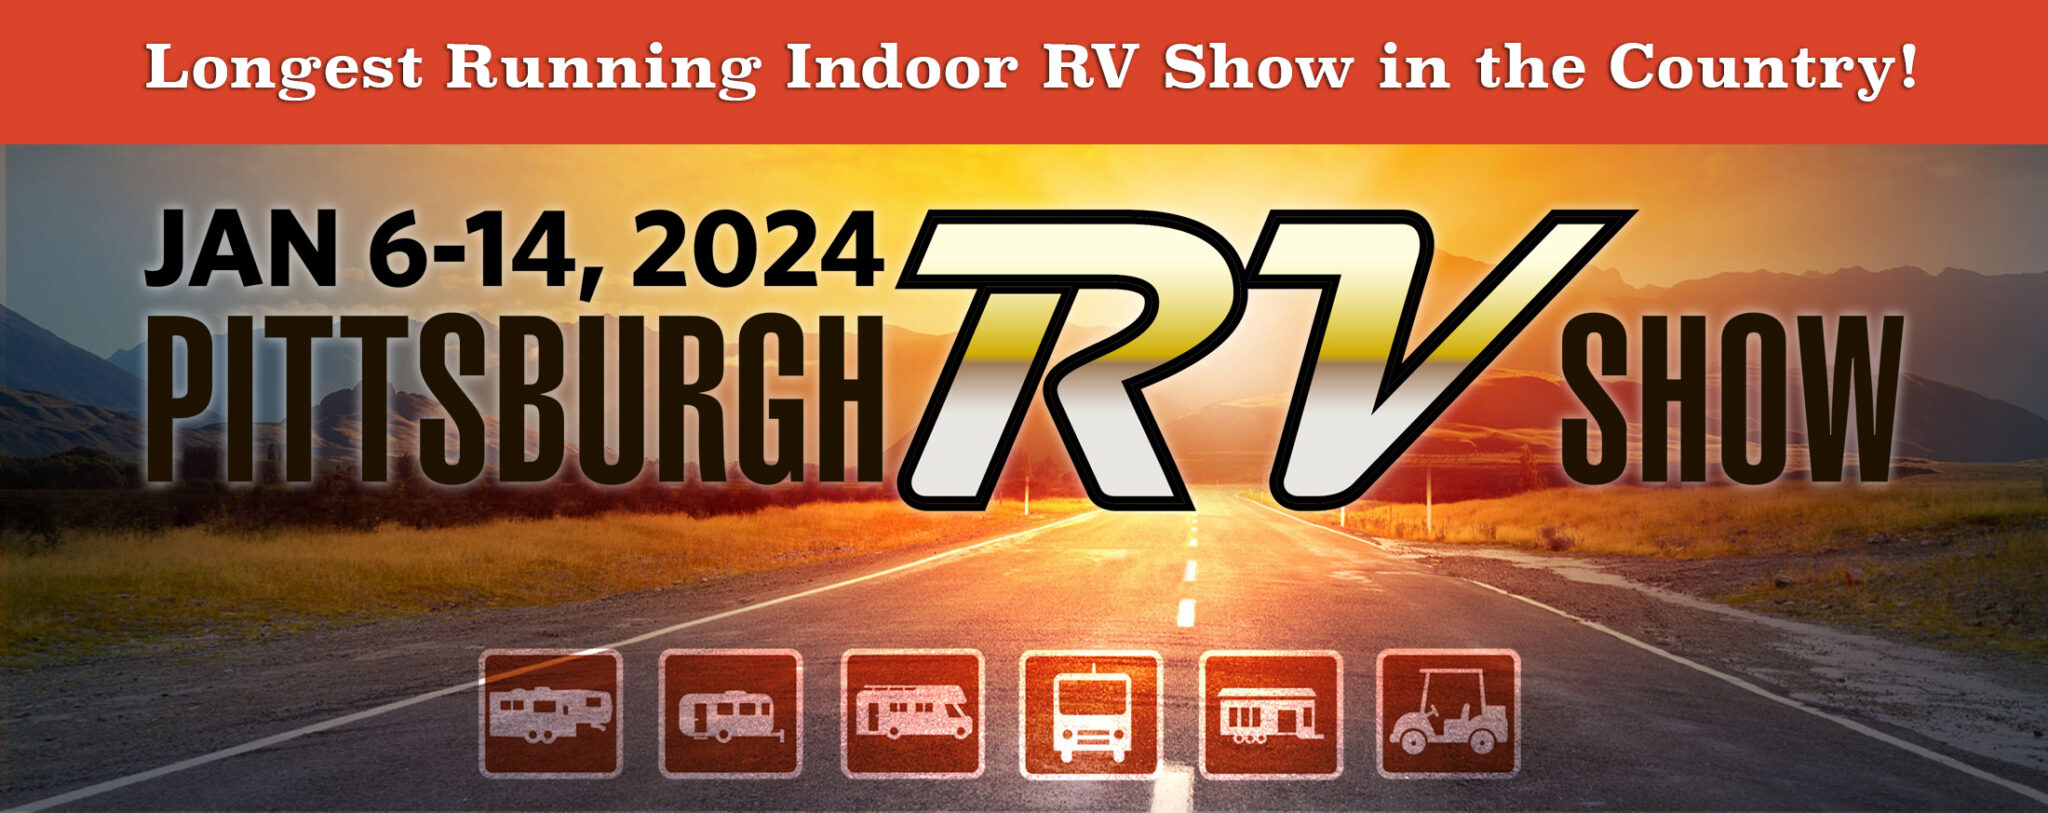 Pittsburgh RV Show and Super Sale Longest running indoor RV show in